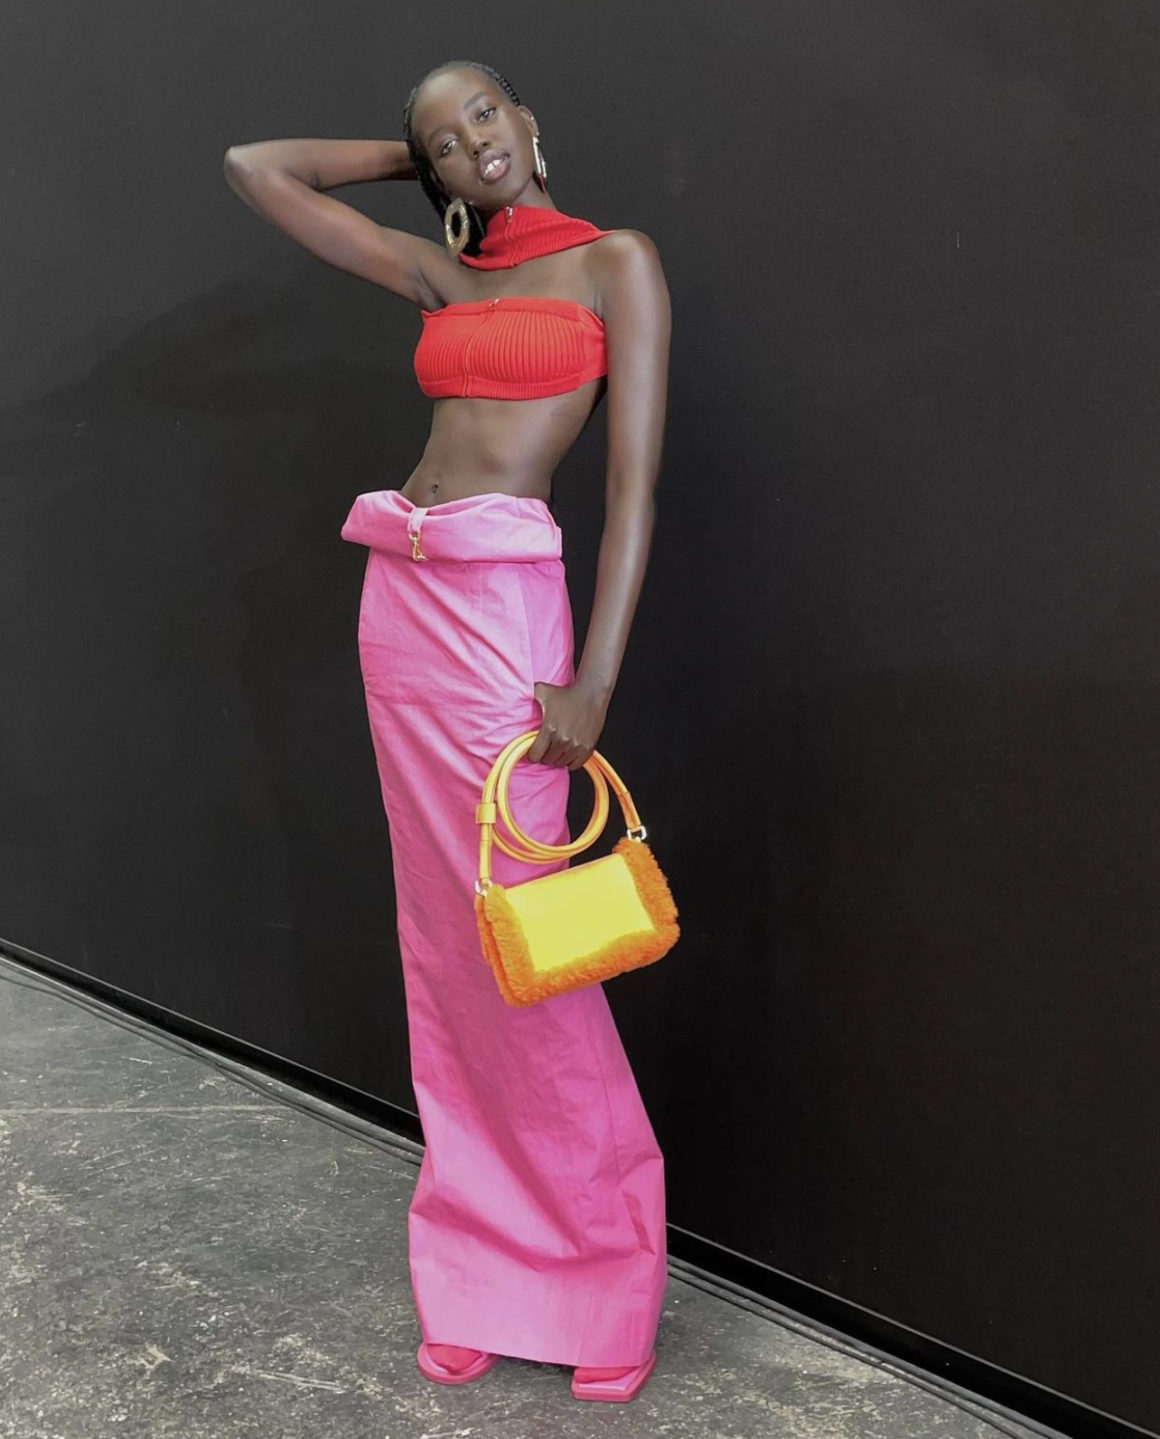 The Fabys Best of 2021 Model of the Year Featuring Bella Hadid Adut Akech Bior Naomi Campbell More4